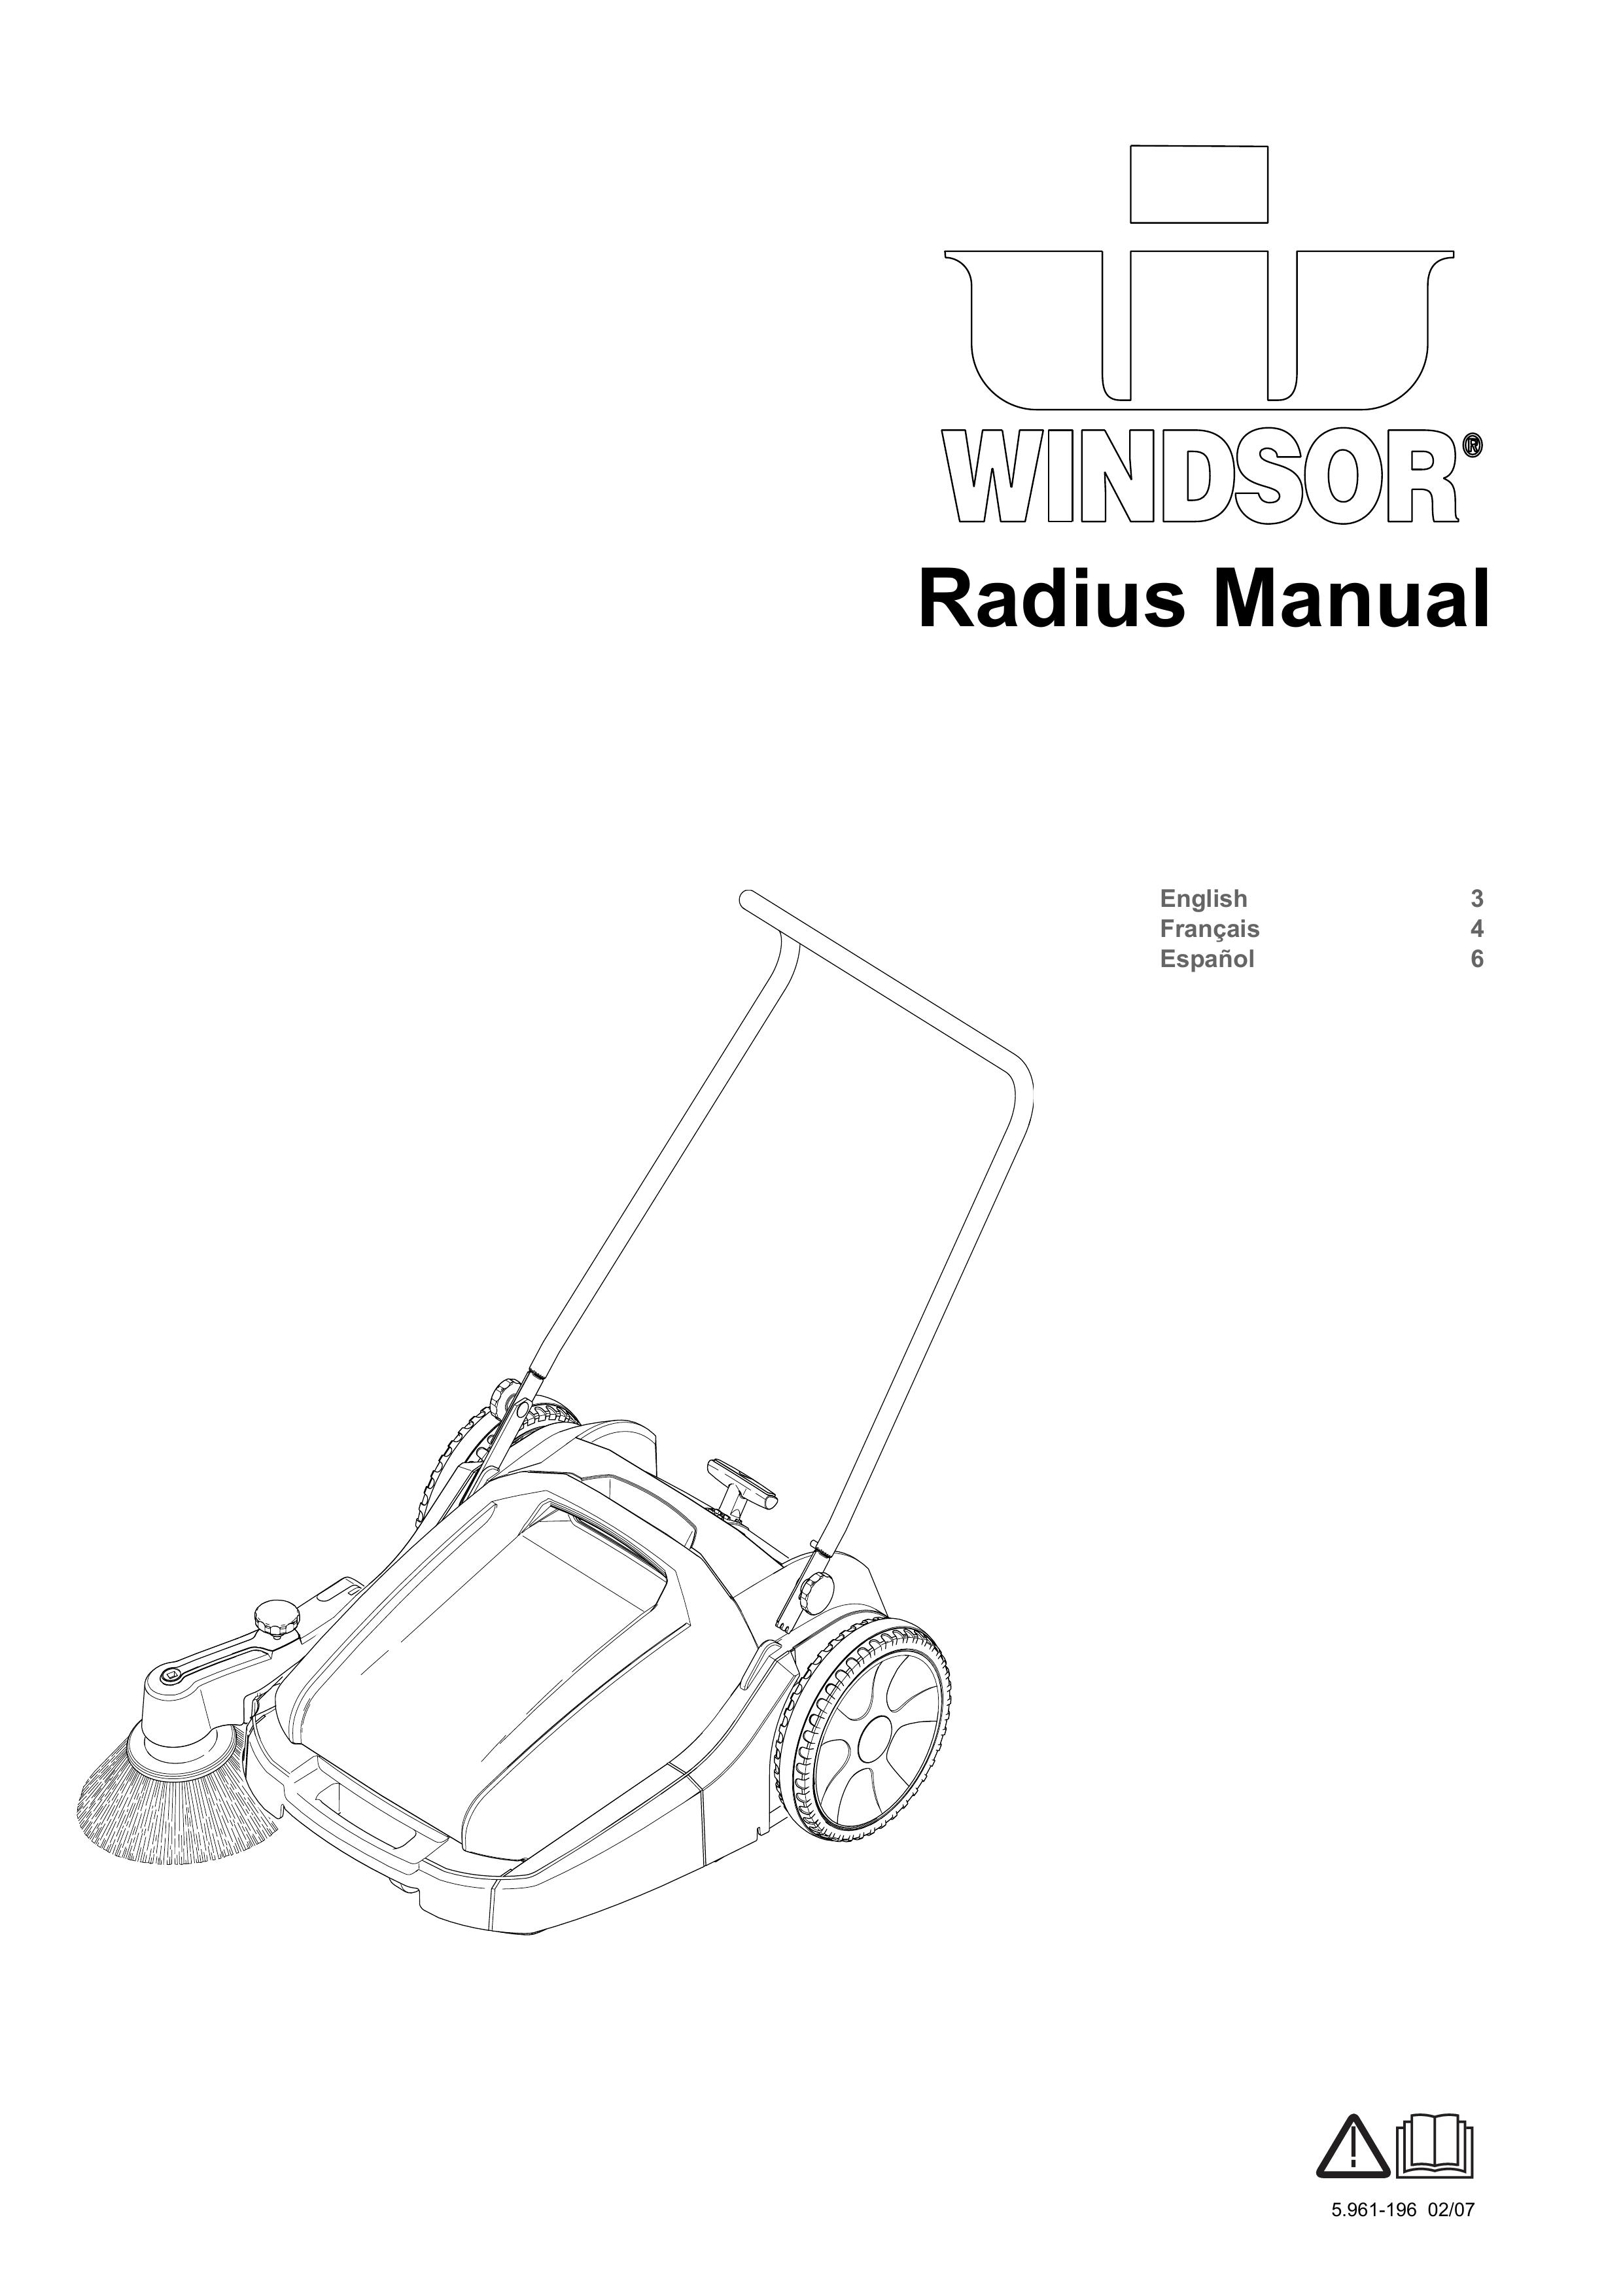 Windsor Sweepers Lawn Sweeper User Manual